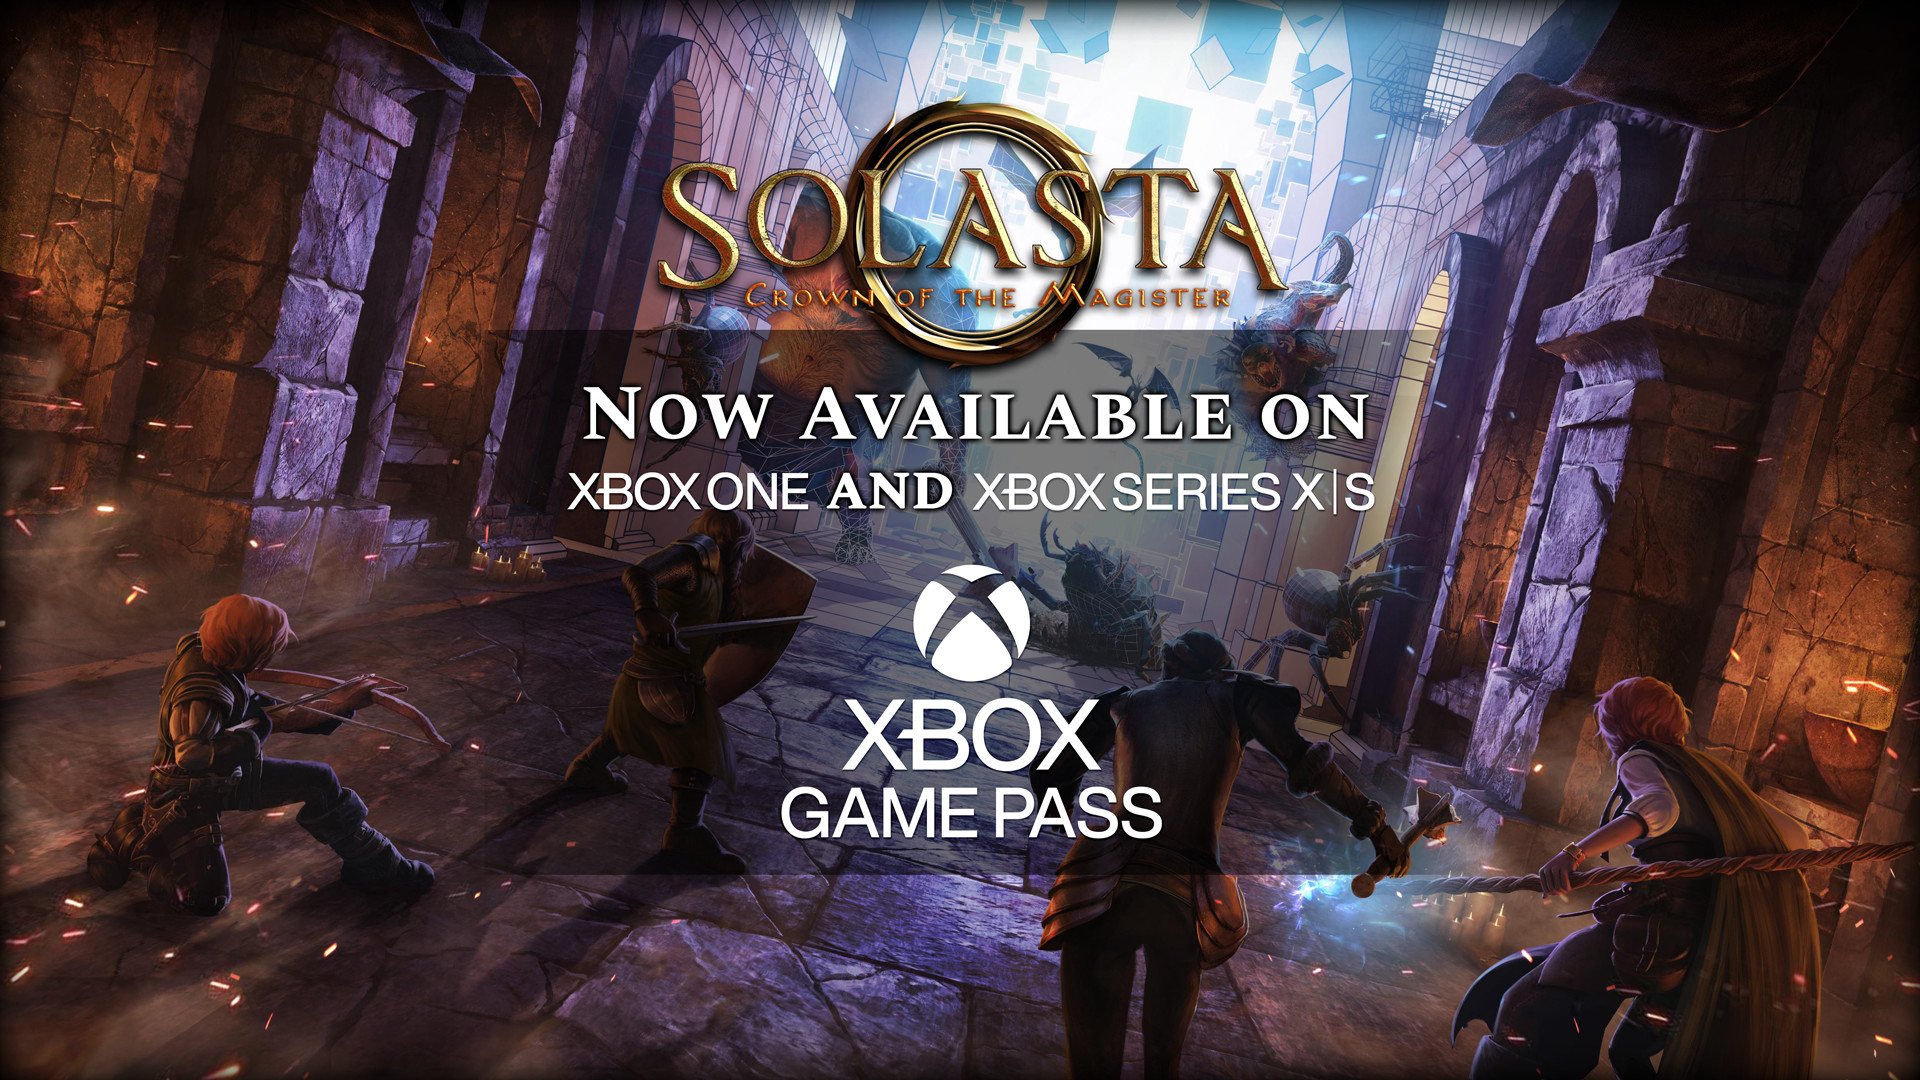 Solasta is now available on Xbox One & Xbox Series X/S